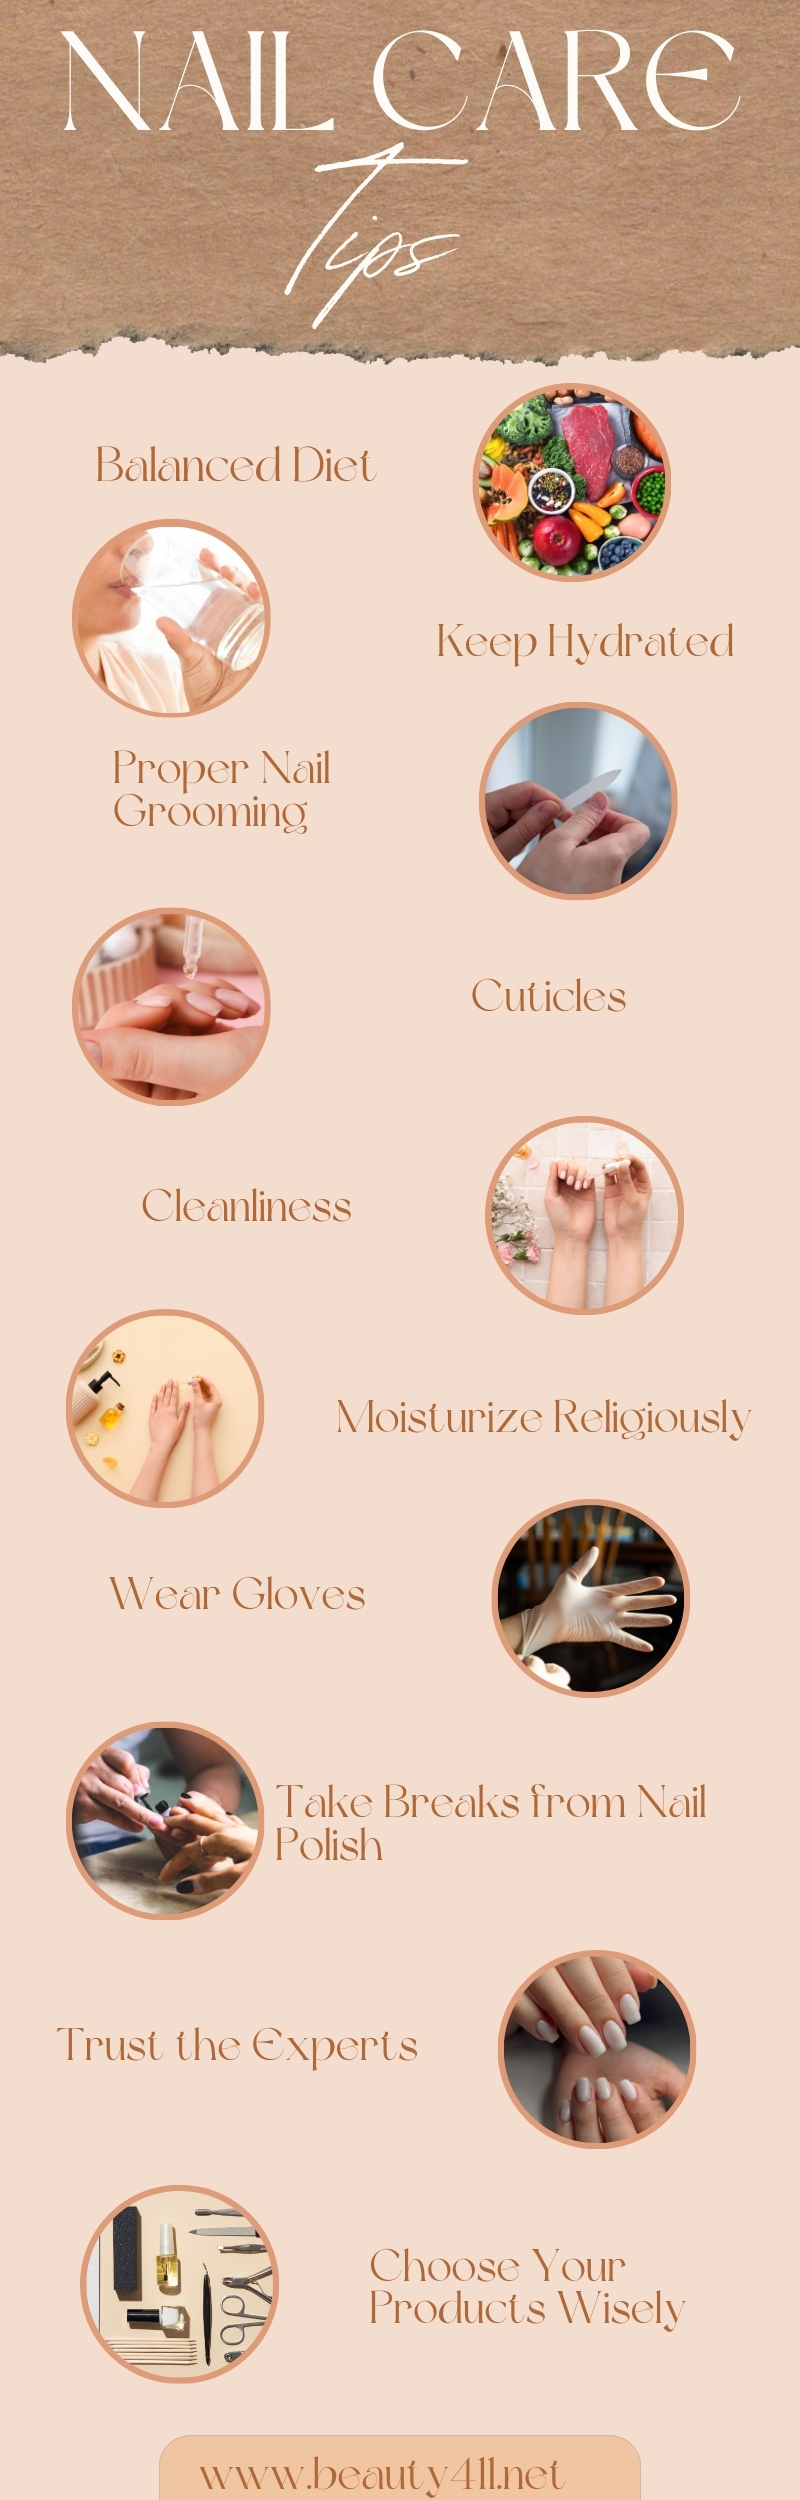 nail care infographic